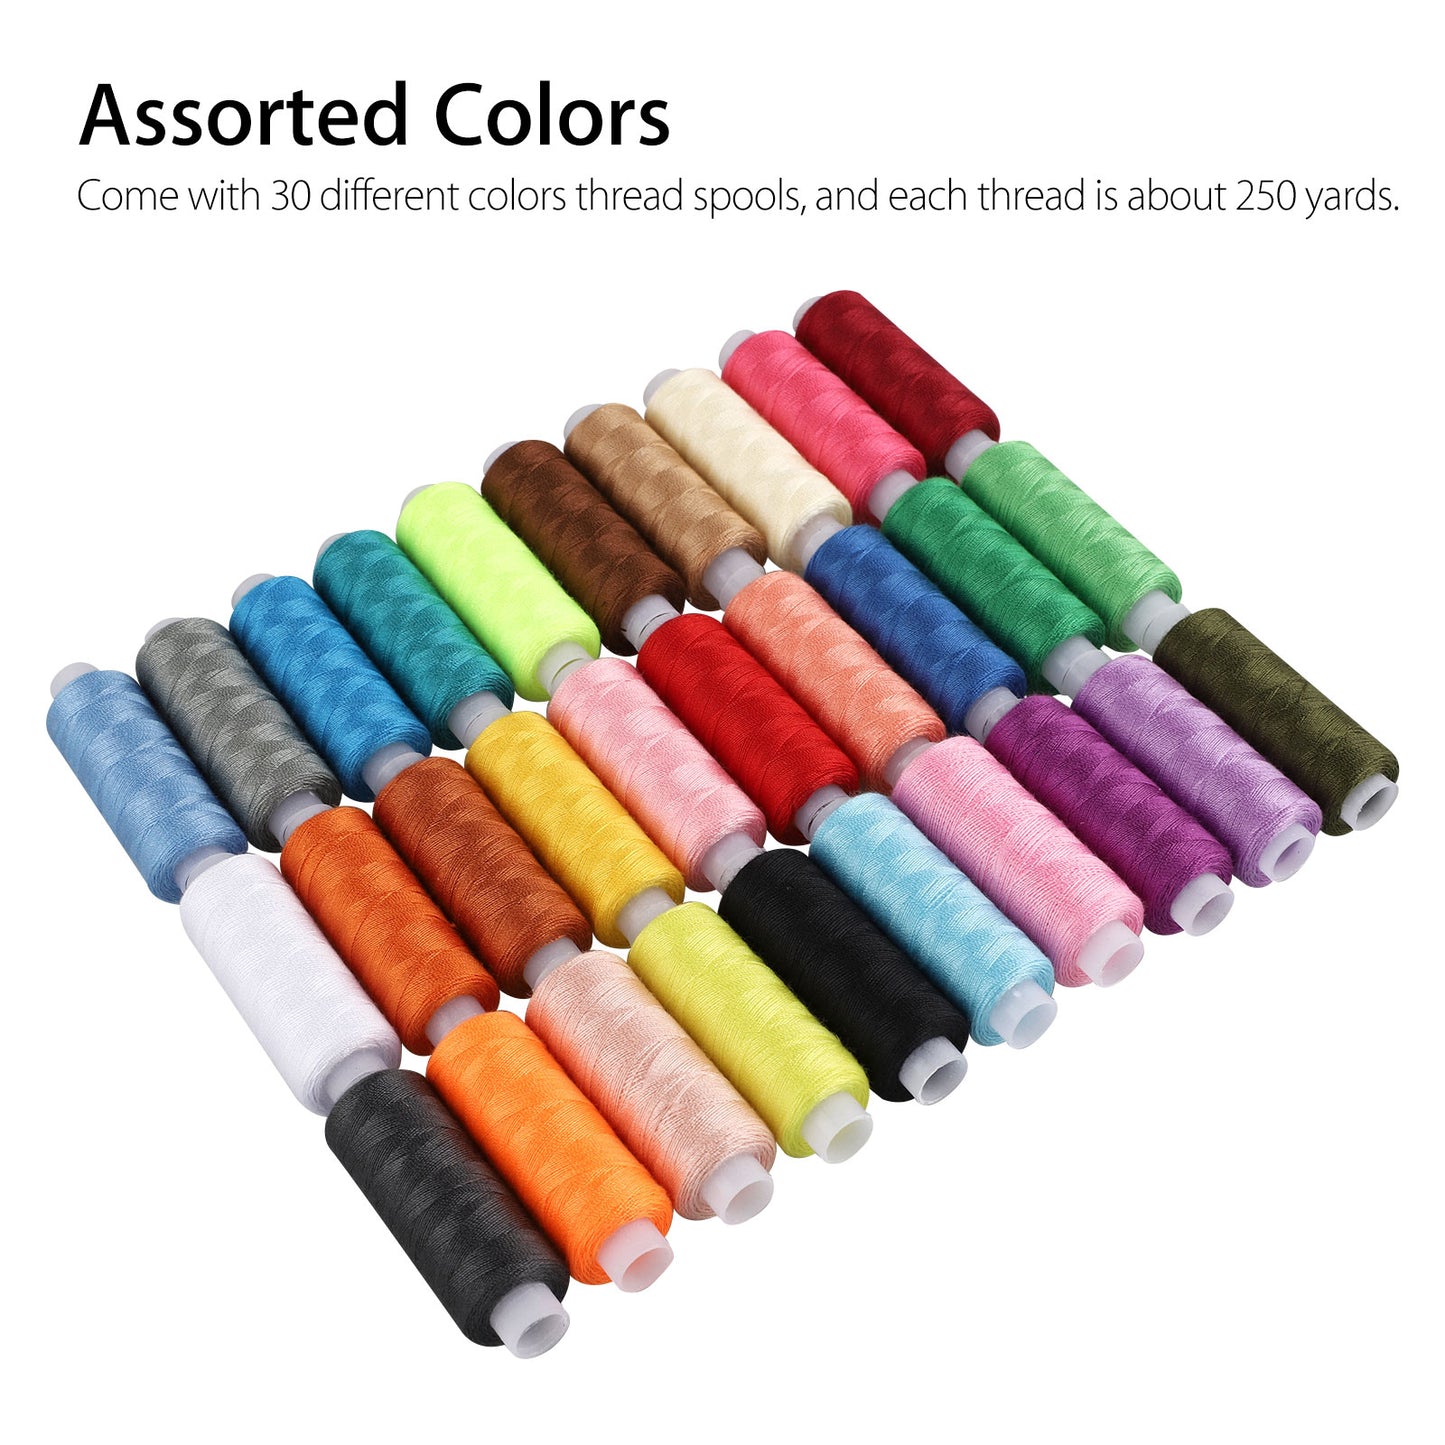 39 pcs Polyester Sewing Thread Assorted Color Spool Set Yarn Sewing Thread Machine Hand